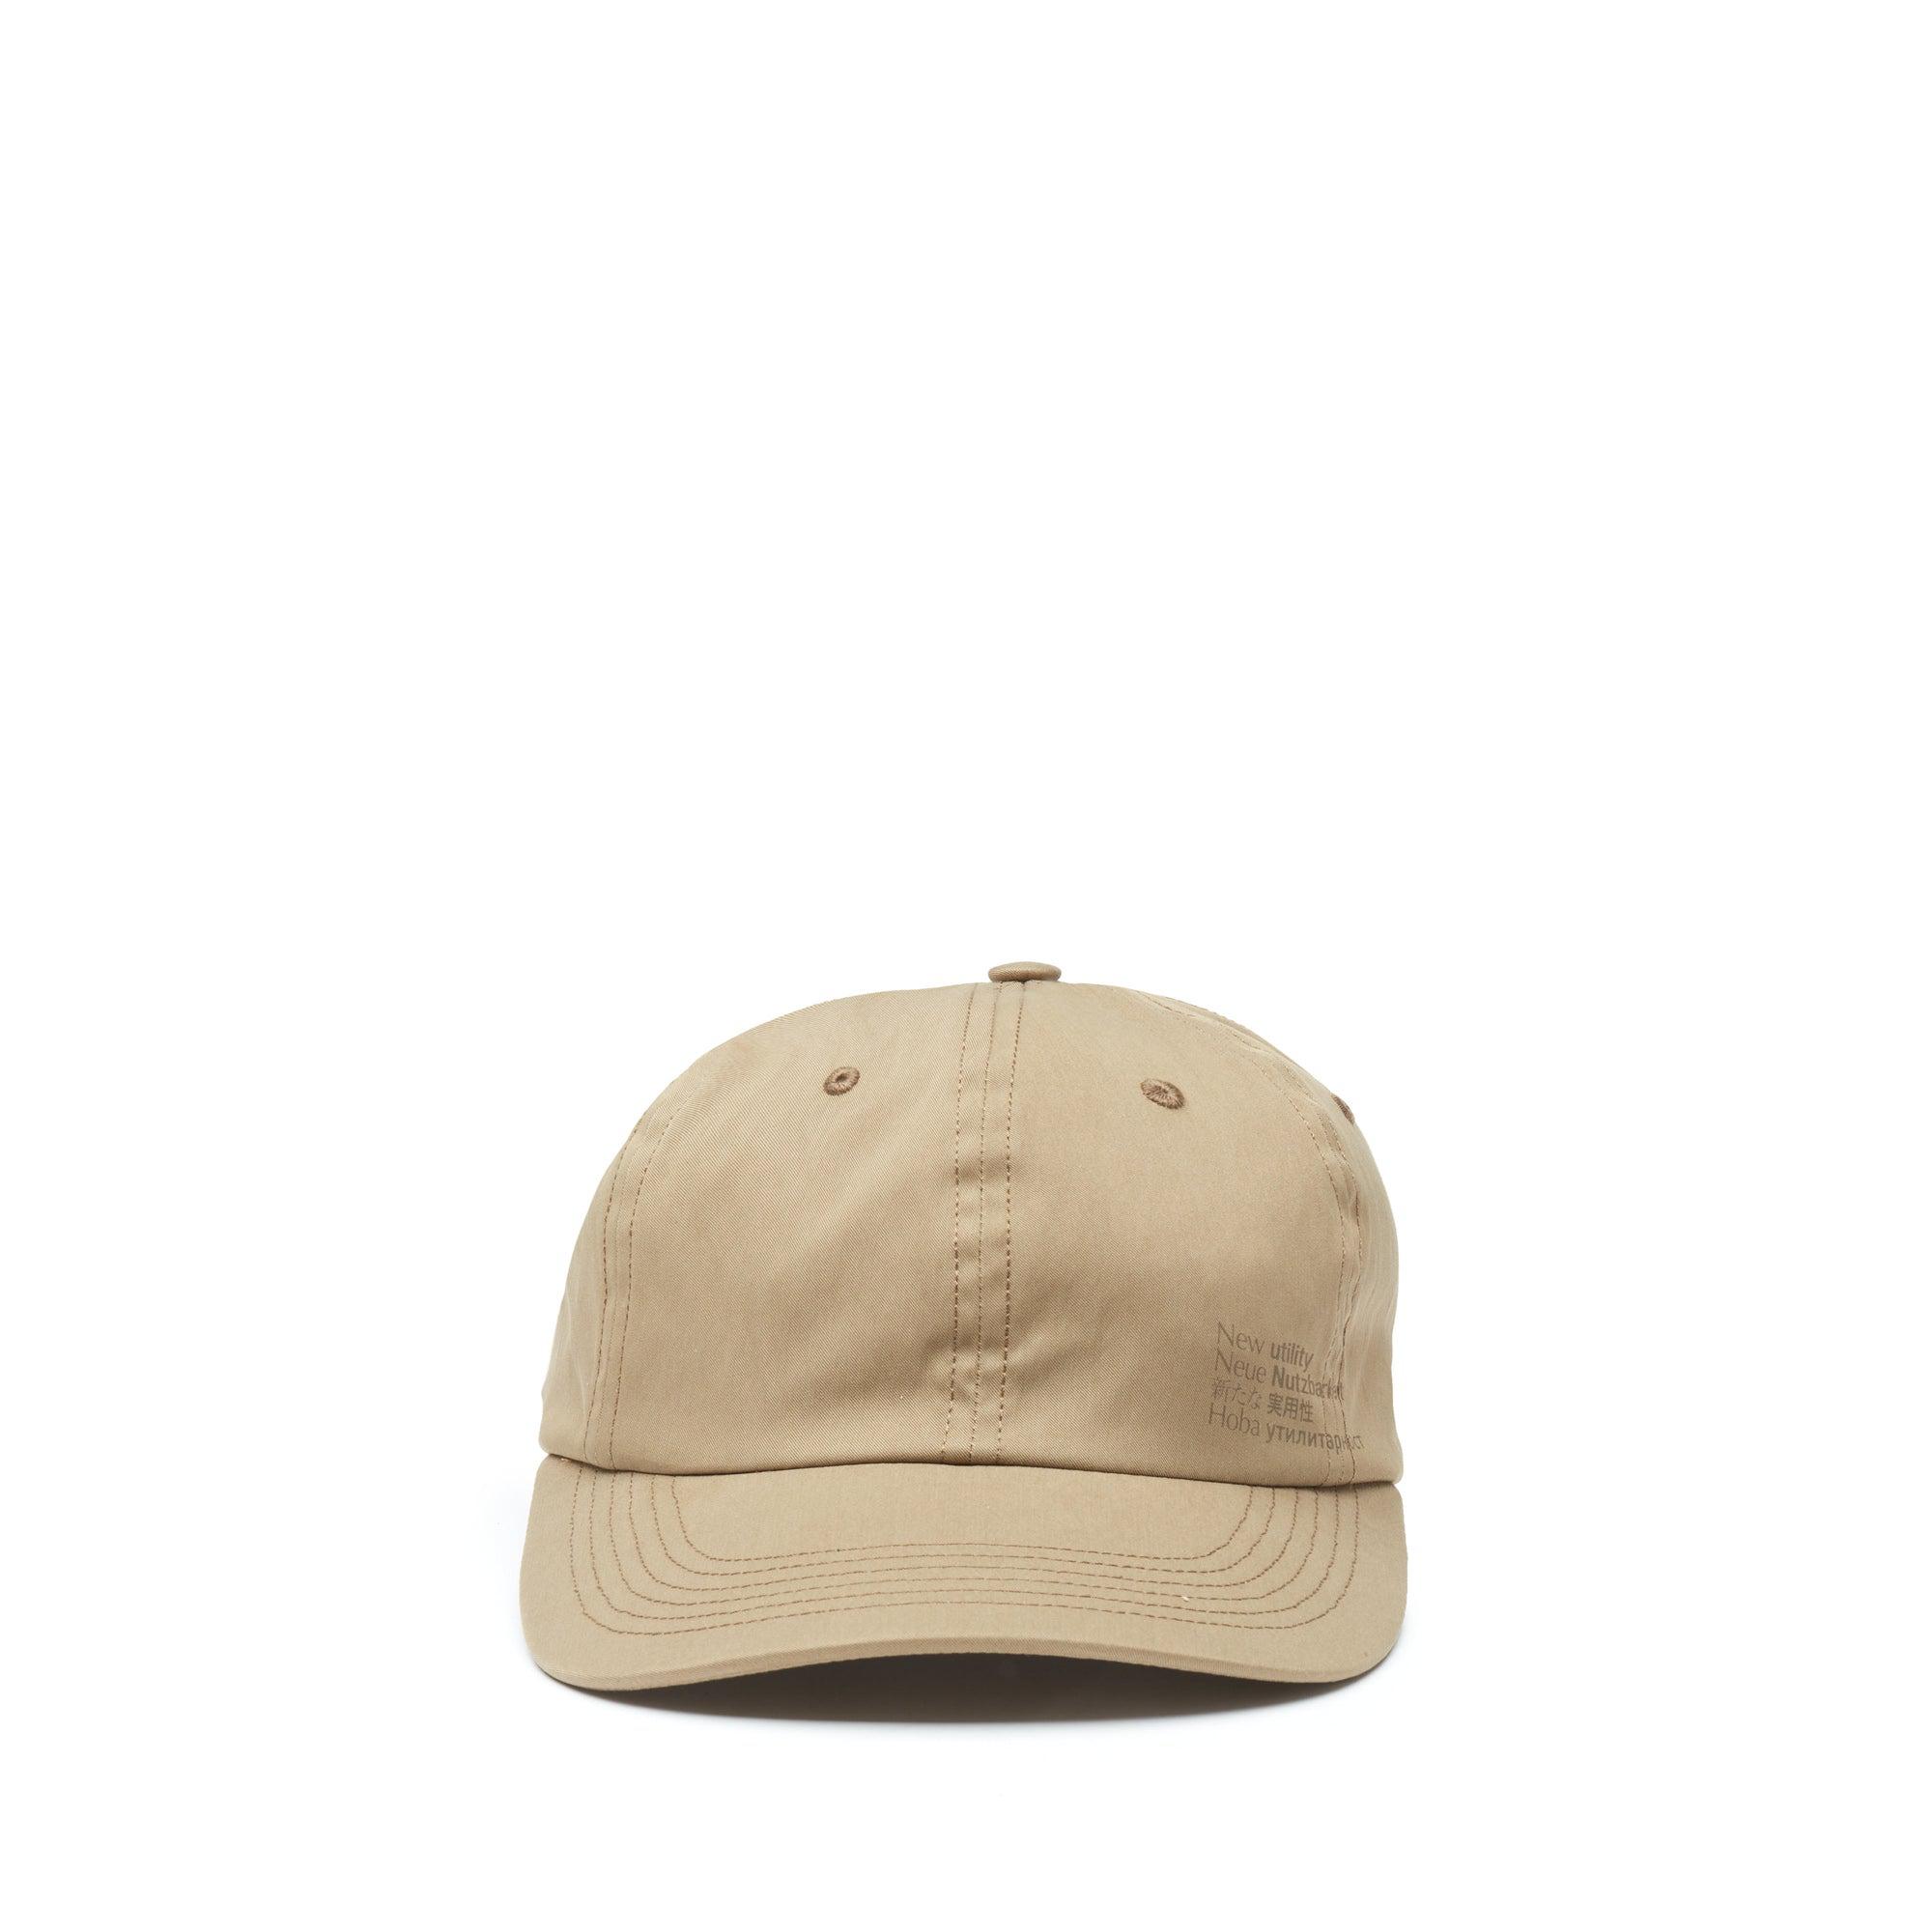 AFFXWRKS New Humility Cap (Khaki Brown) by AFFIX